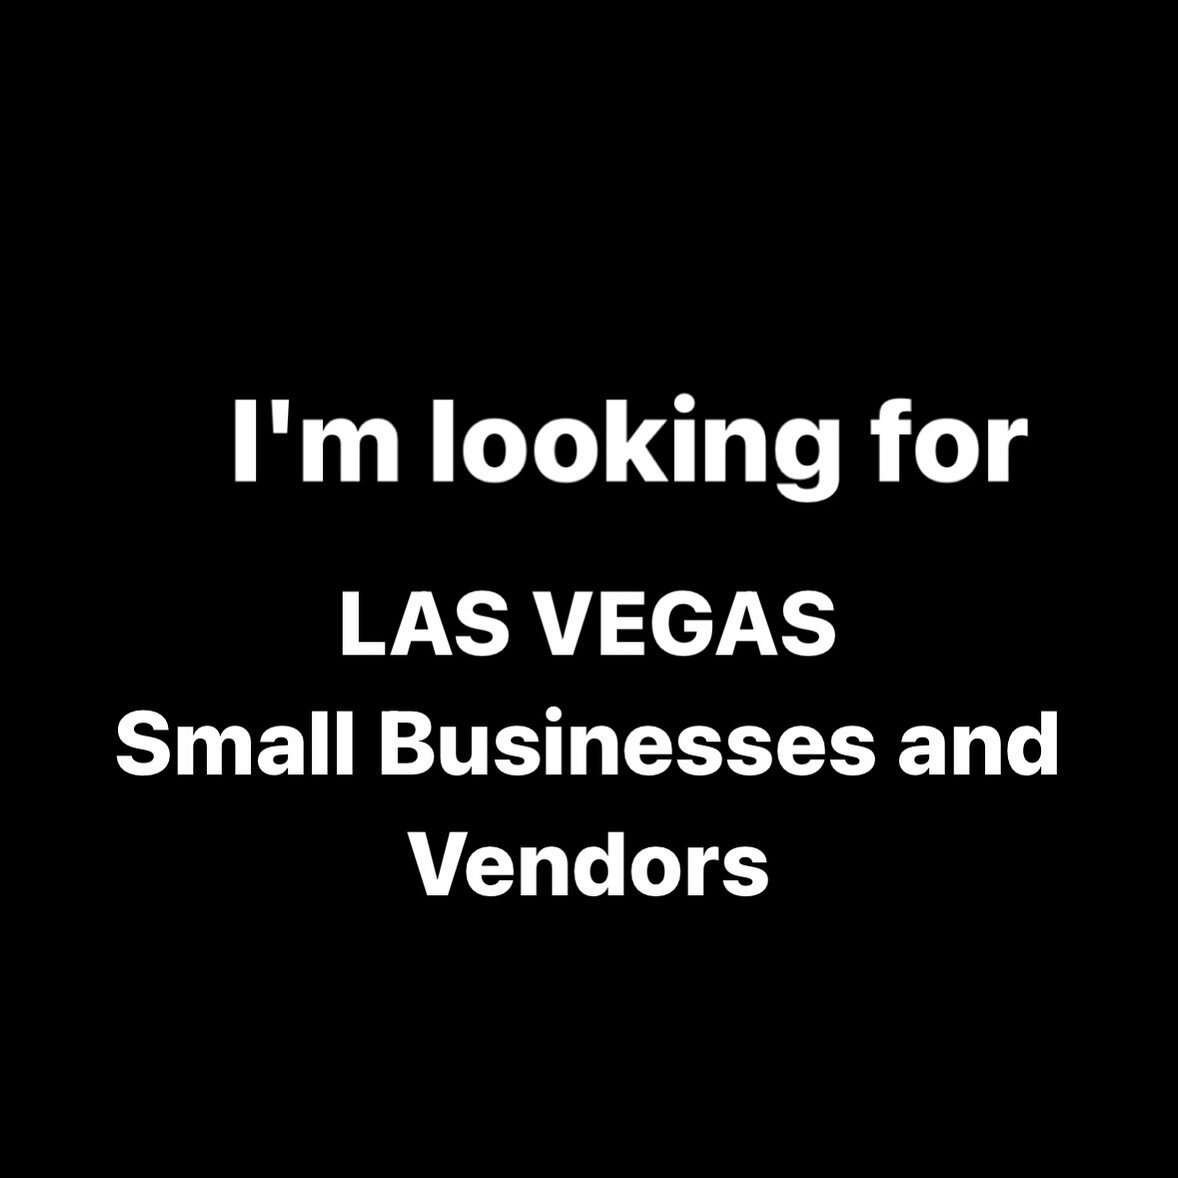 If you or someone you know is interested in being a vendor at my March 16th event in #LasVegas, tag them or DM me ASAP!  5 slots available